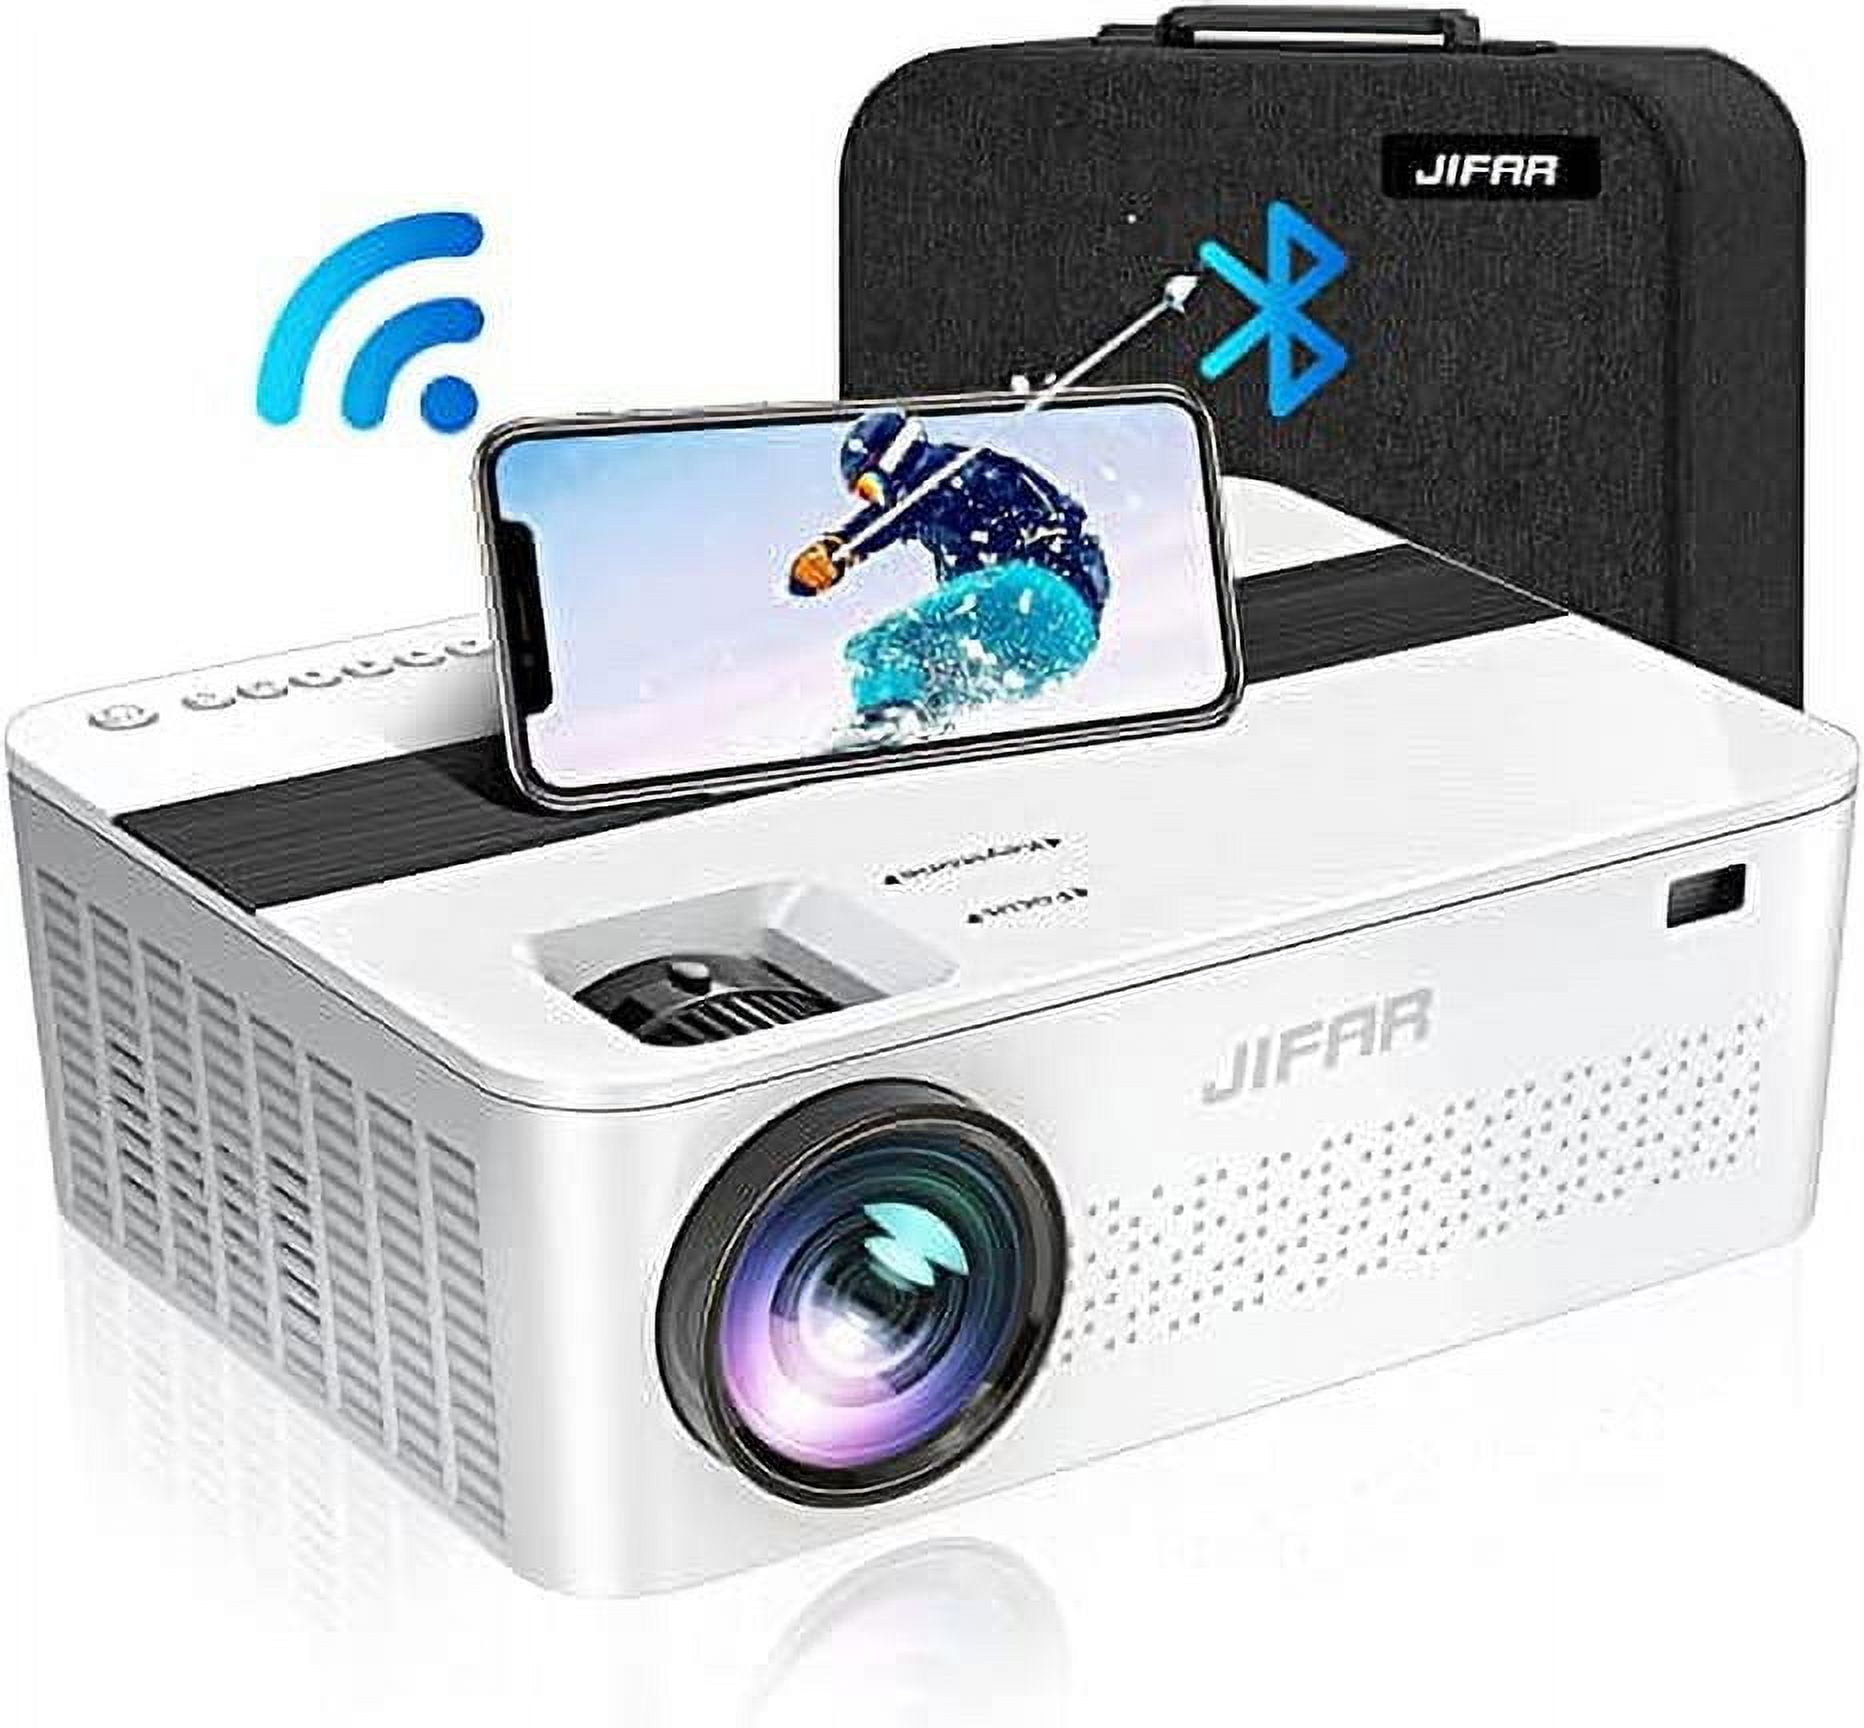 Projector with 5G WiFi and Bluetooth - 1080P Native Outdoor Portable  Projector 4K Support, YOTON Movie Home Projector with HDMI/VGA/USB, Phone  Projector